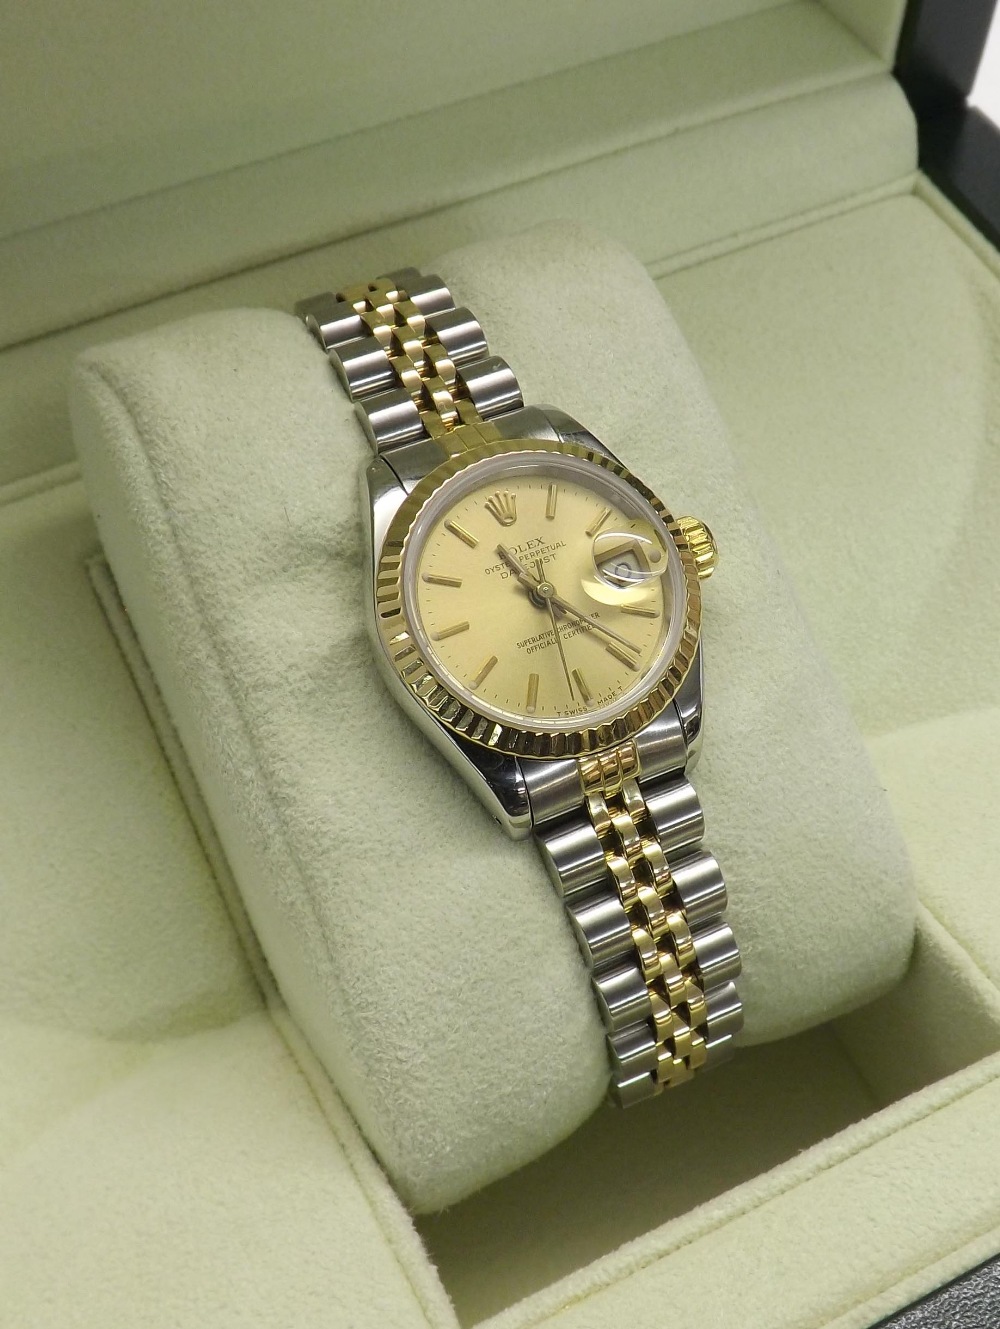 Rolex Oyster Perpetual Datejust stainless steel and gold lady's bracelet watch, ref. 69173, ser. no. - Image 2 of 4